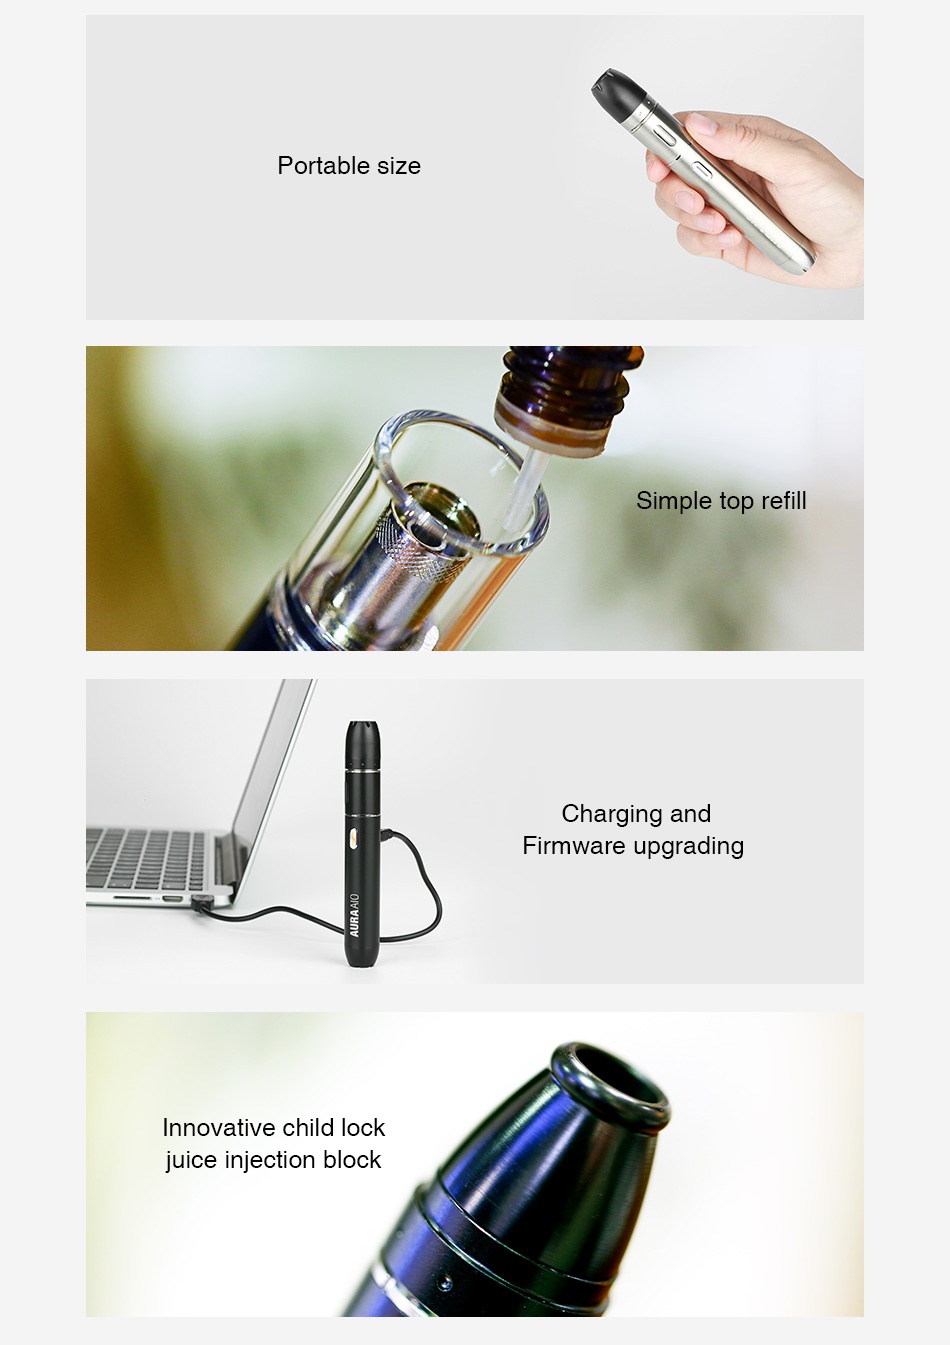 VapeOnly Aura AIO Starter Kit 2000mAh Portable size Simple top refil arguing and Firmware upgrading nnovative child lock juice injection block